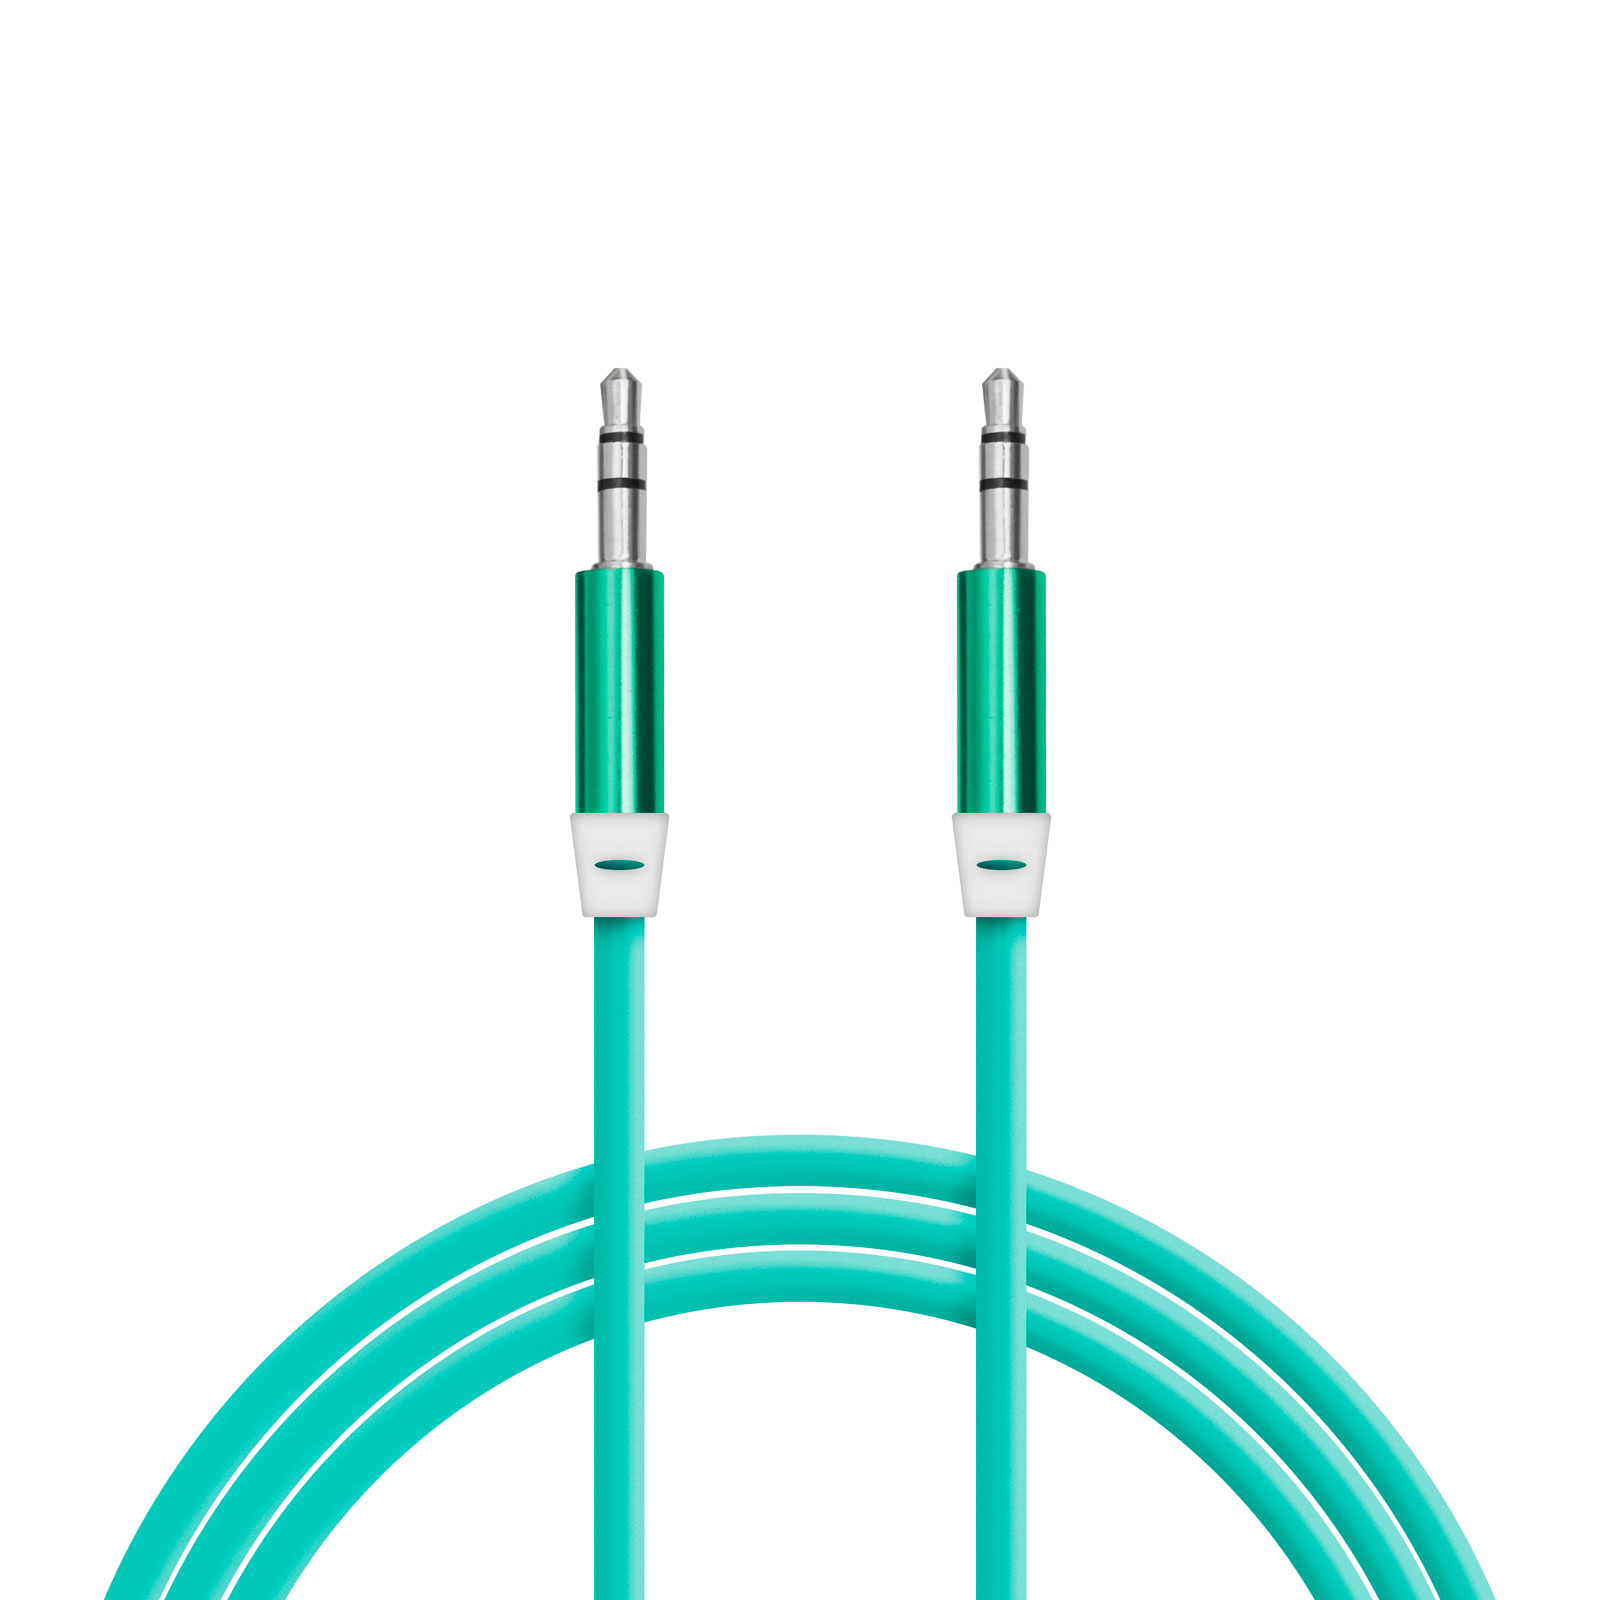 AUX cable - 3,5 mm jack thumb